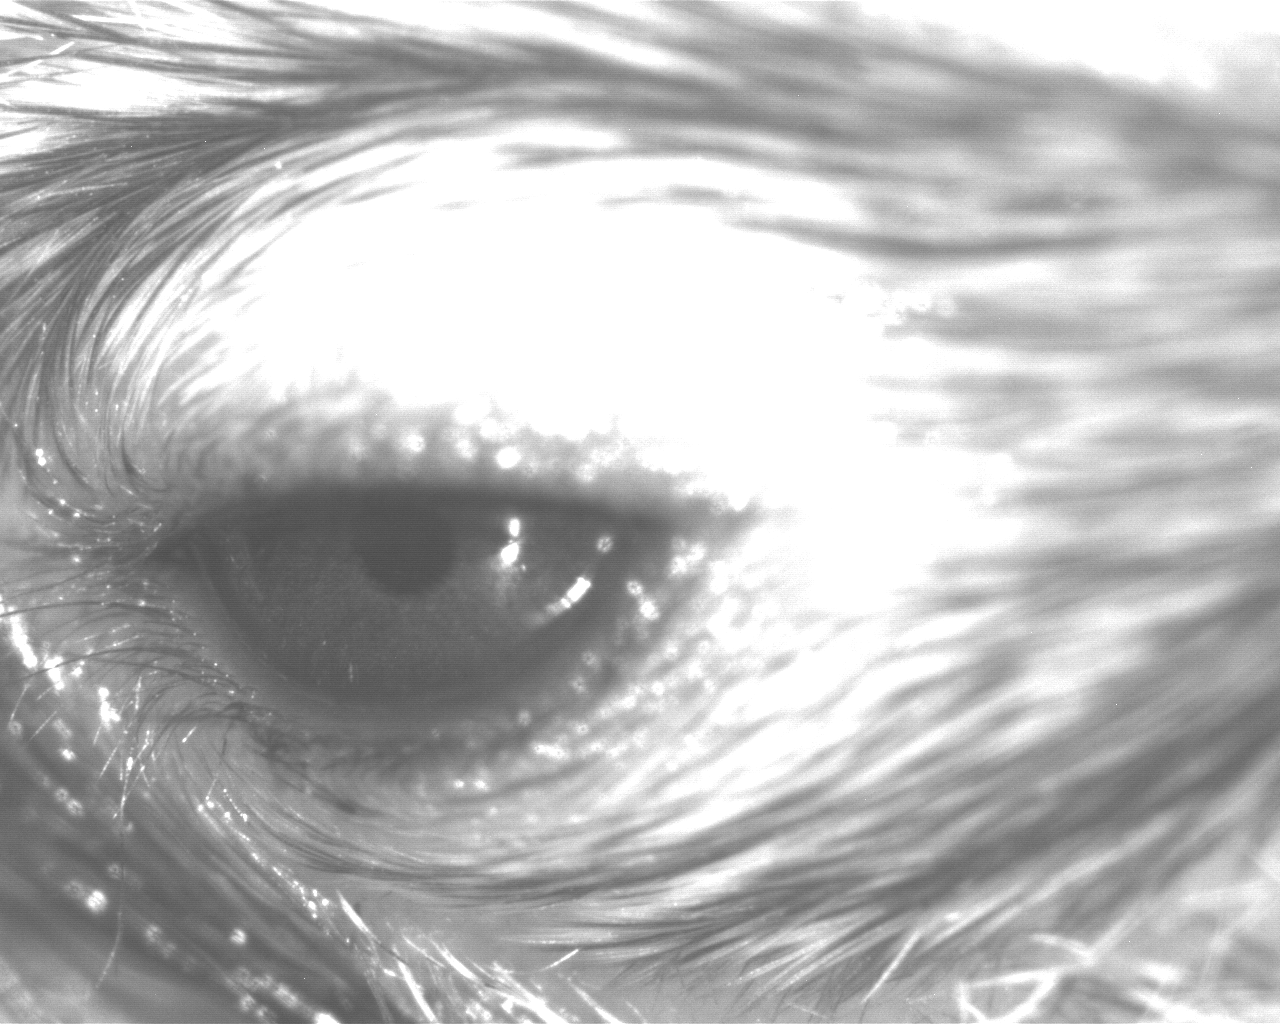 Fluctuations in pupil size in this mouse eye can reflect emotional state. 